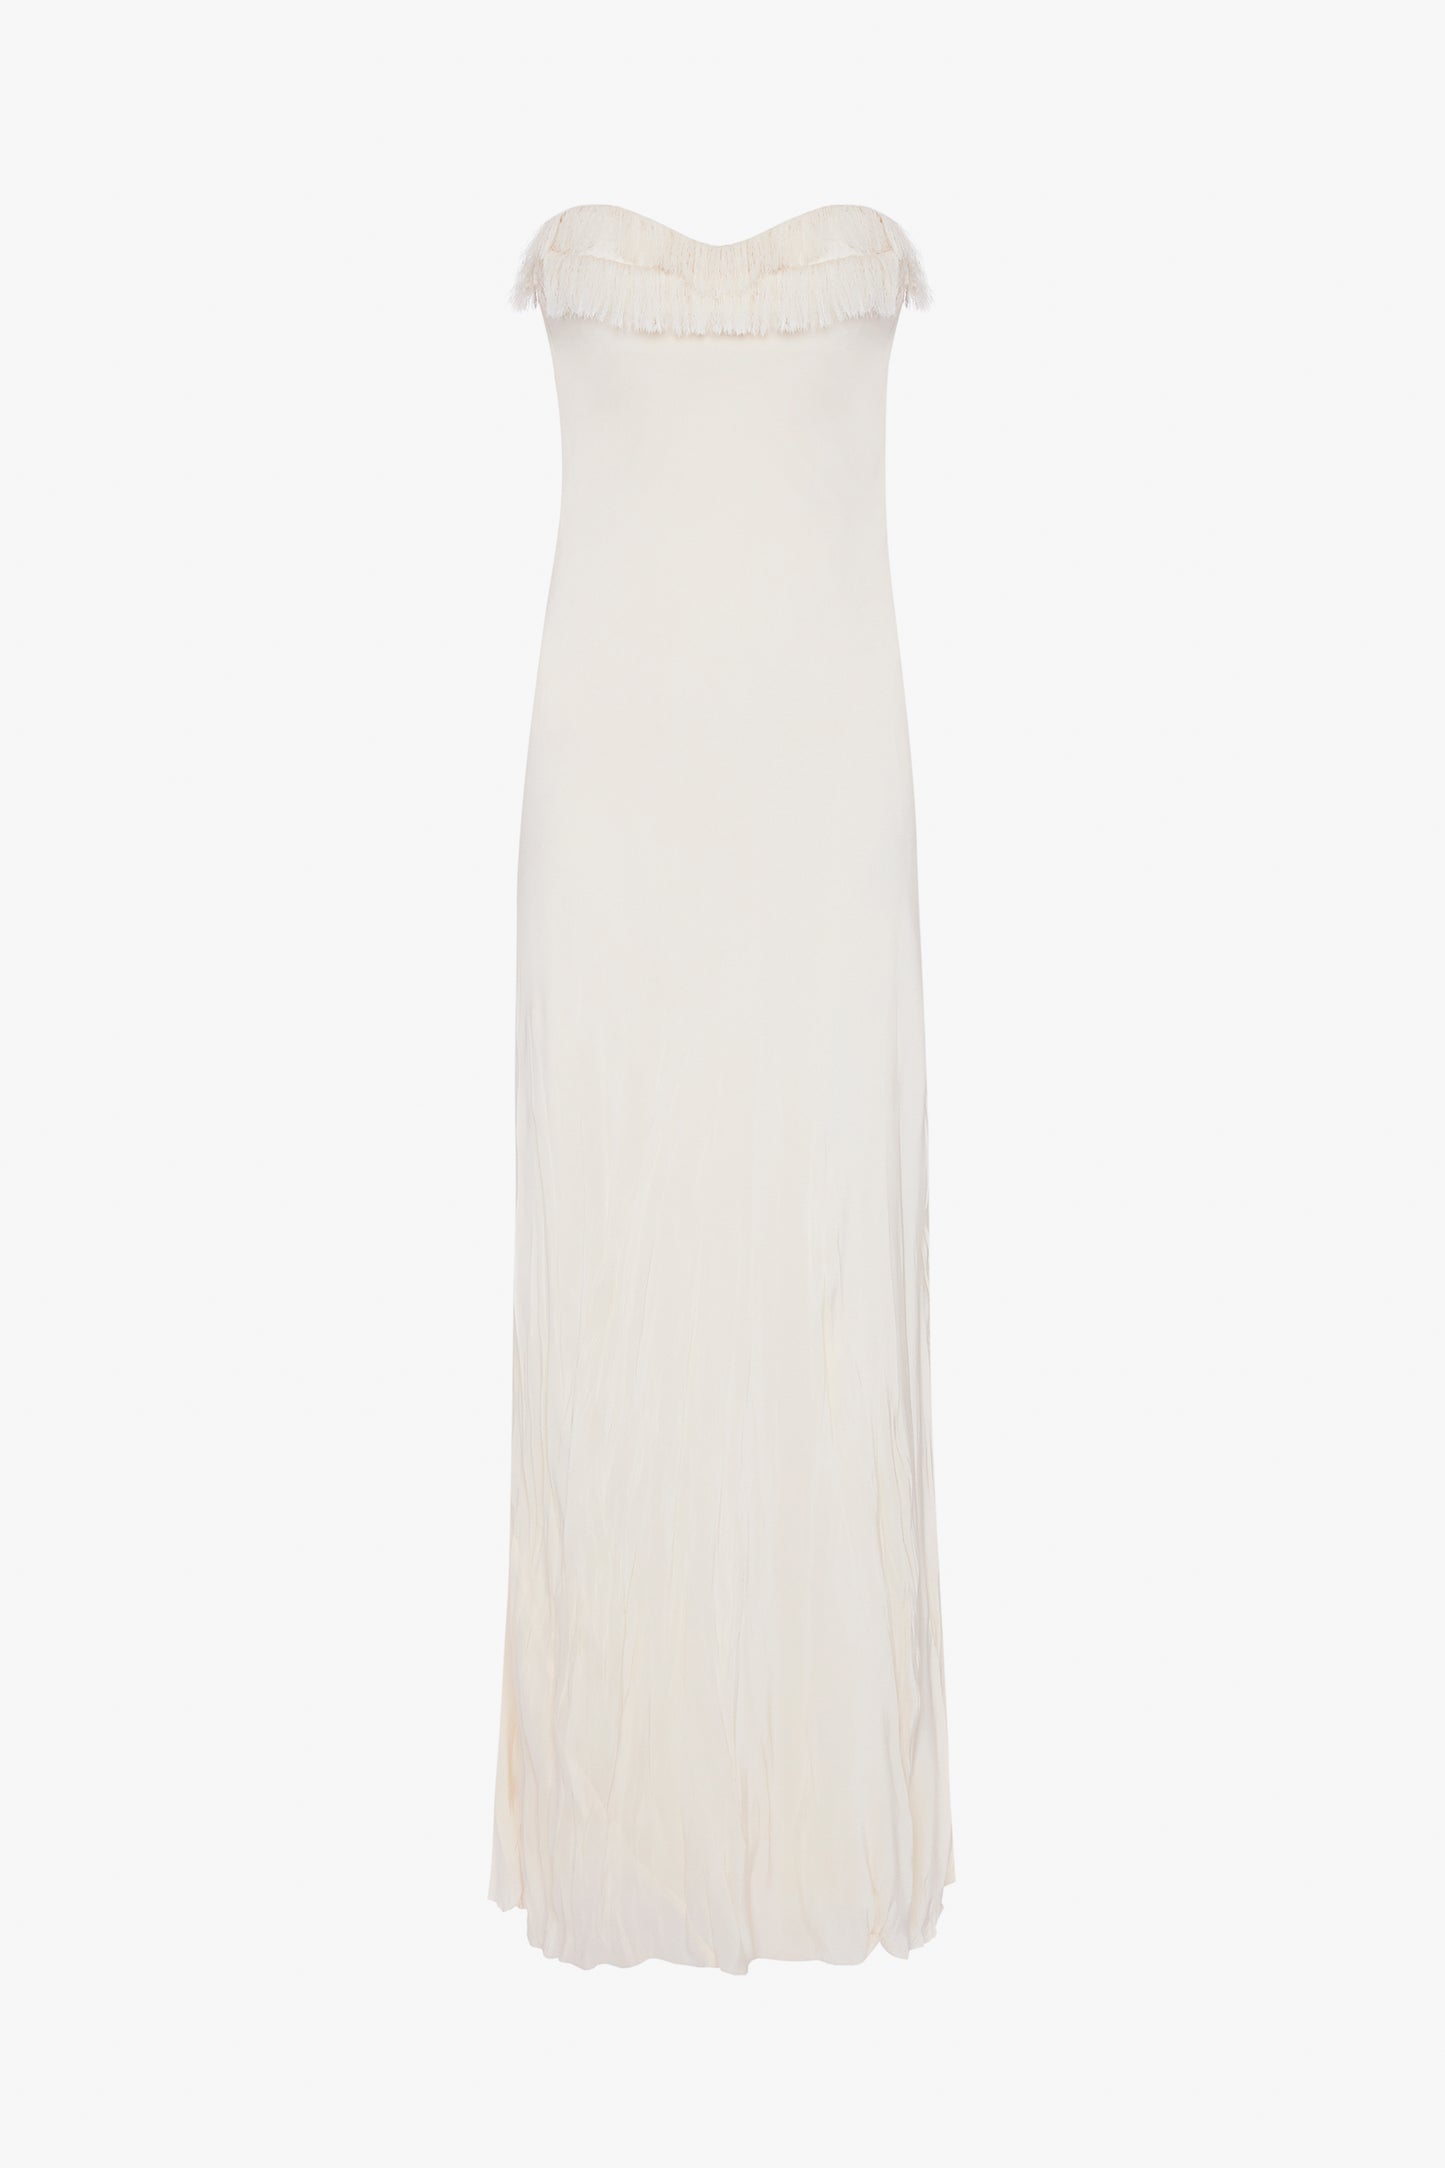 An elegant Ivory Victoria Beckham off-the-shoulder gown with corset detail and a smooth, crease-effect skirt, displayed against a plain white background.